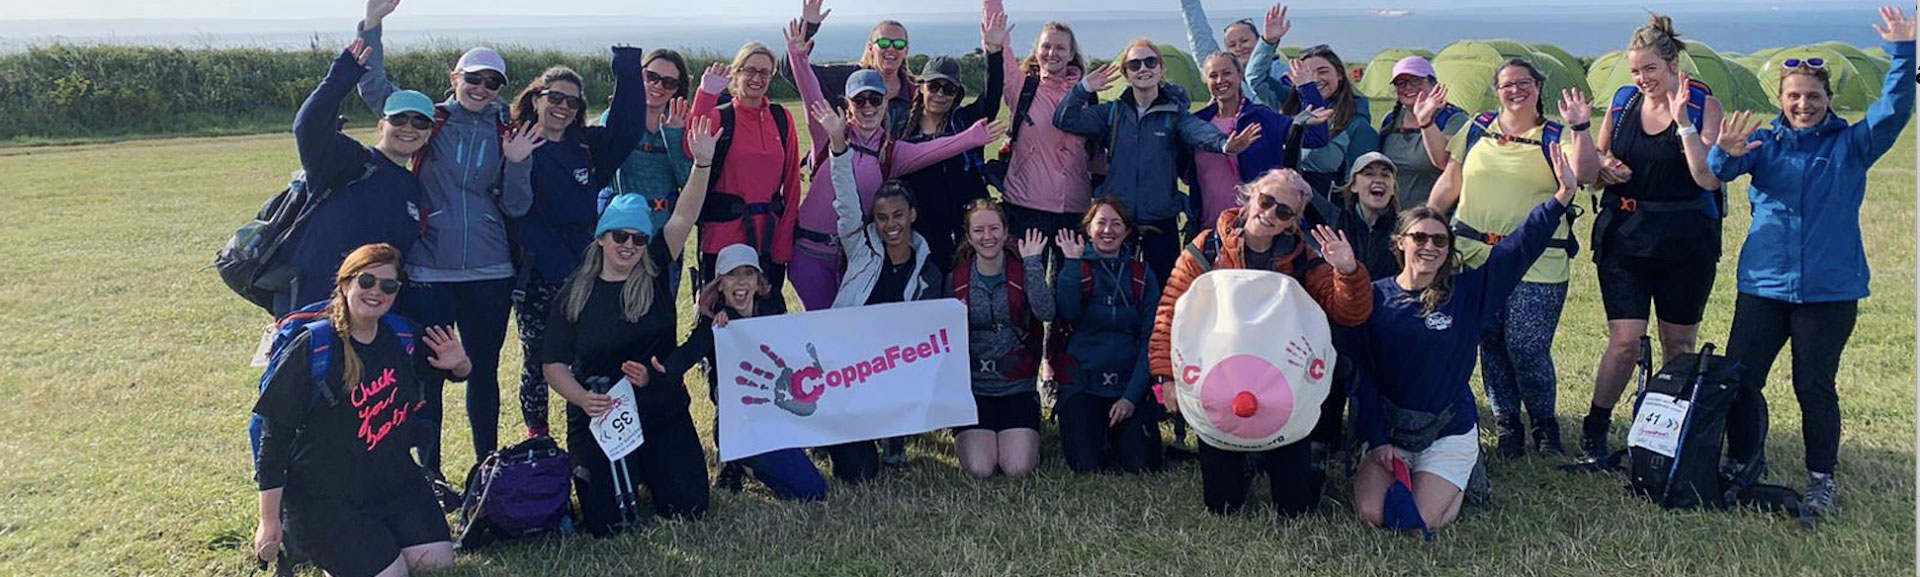 CoppaTrek With Gi! Olivia Takes On 100km Challenge For CoppaFeel